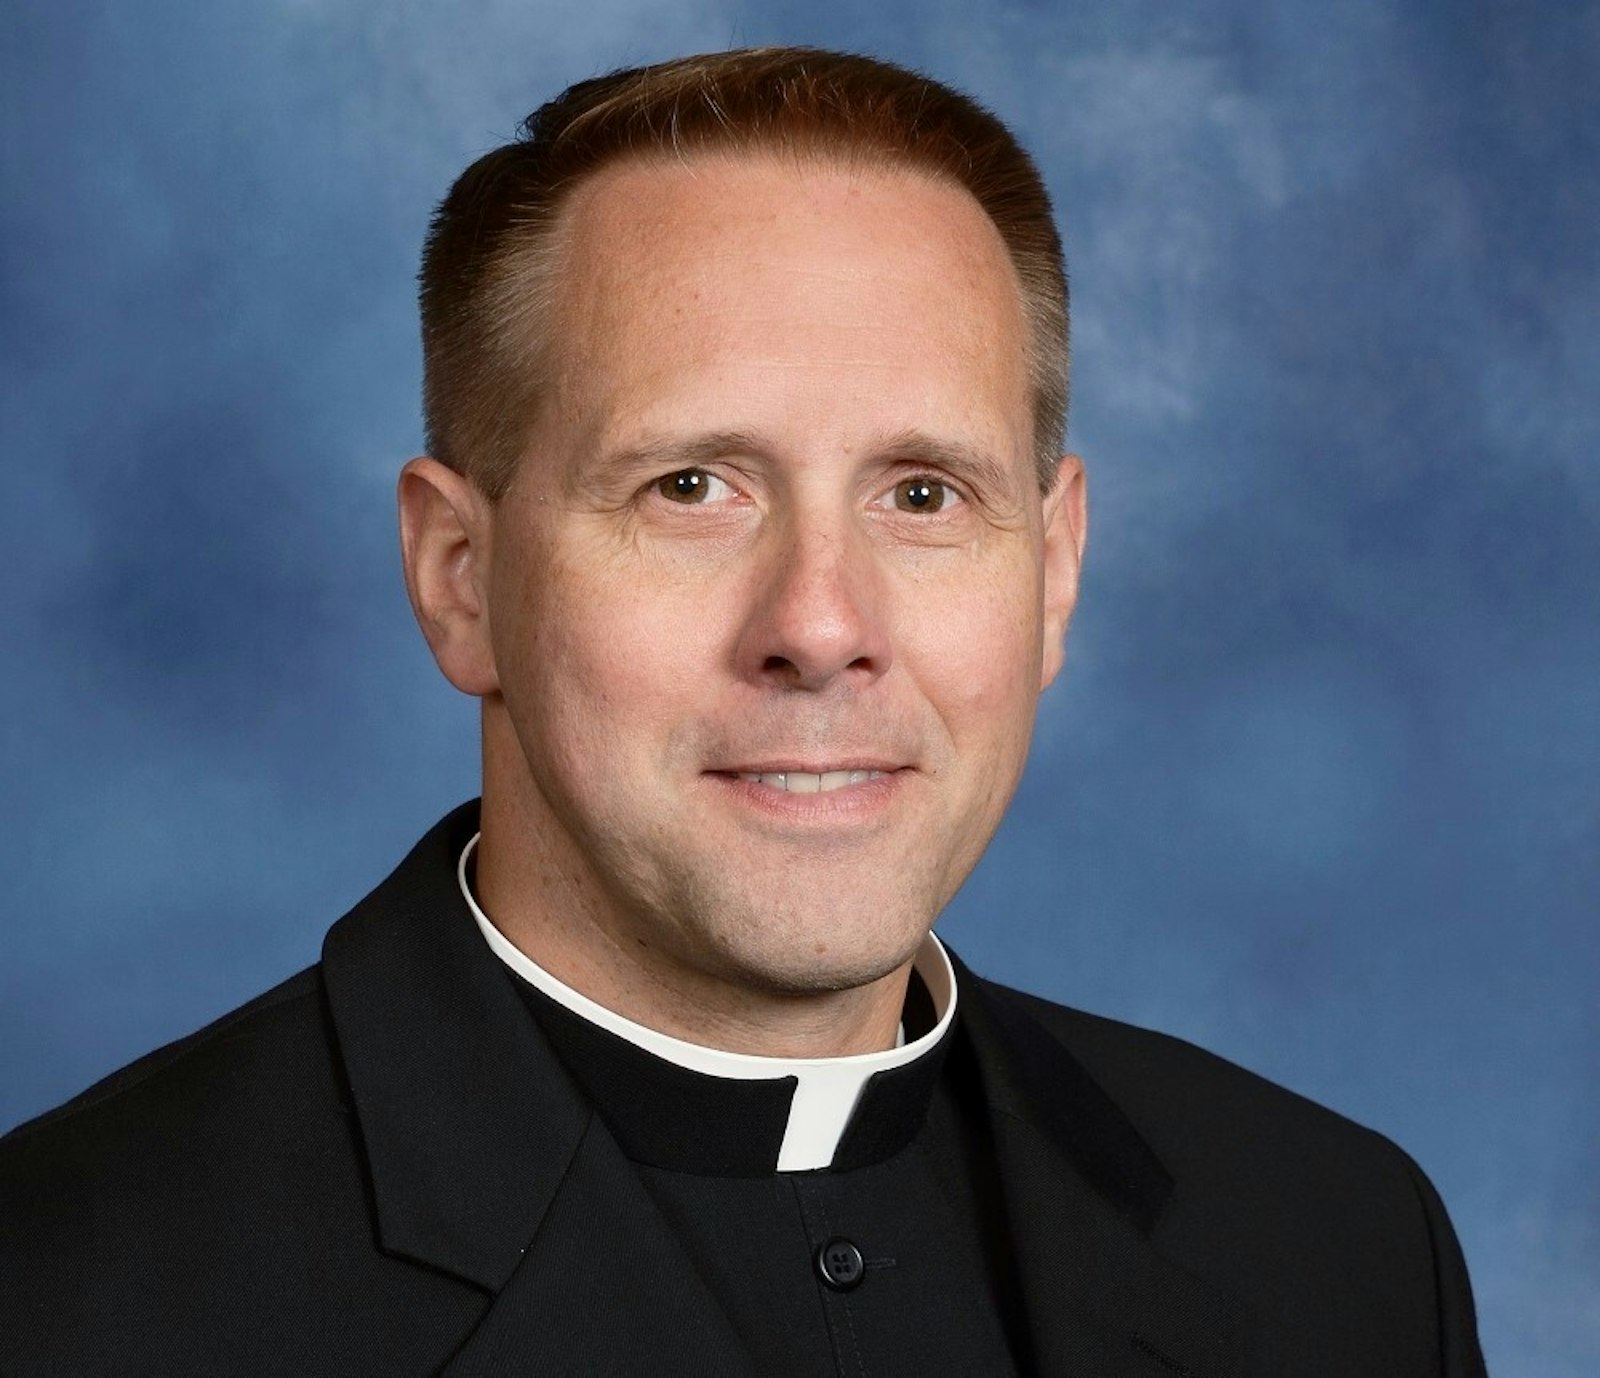 Fr. Paul Ballien of St. John Neumann Parish in Canton was appointed director of the Society for the Propagation of the Faith effective Aug. 1. (Archdiocese of Detroit photo)